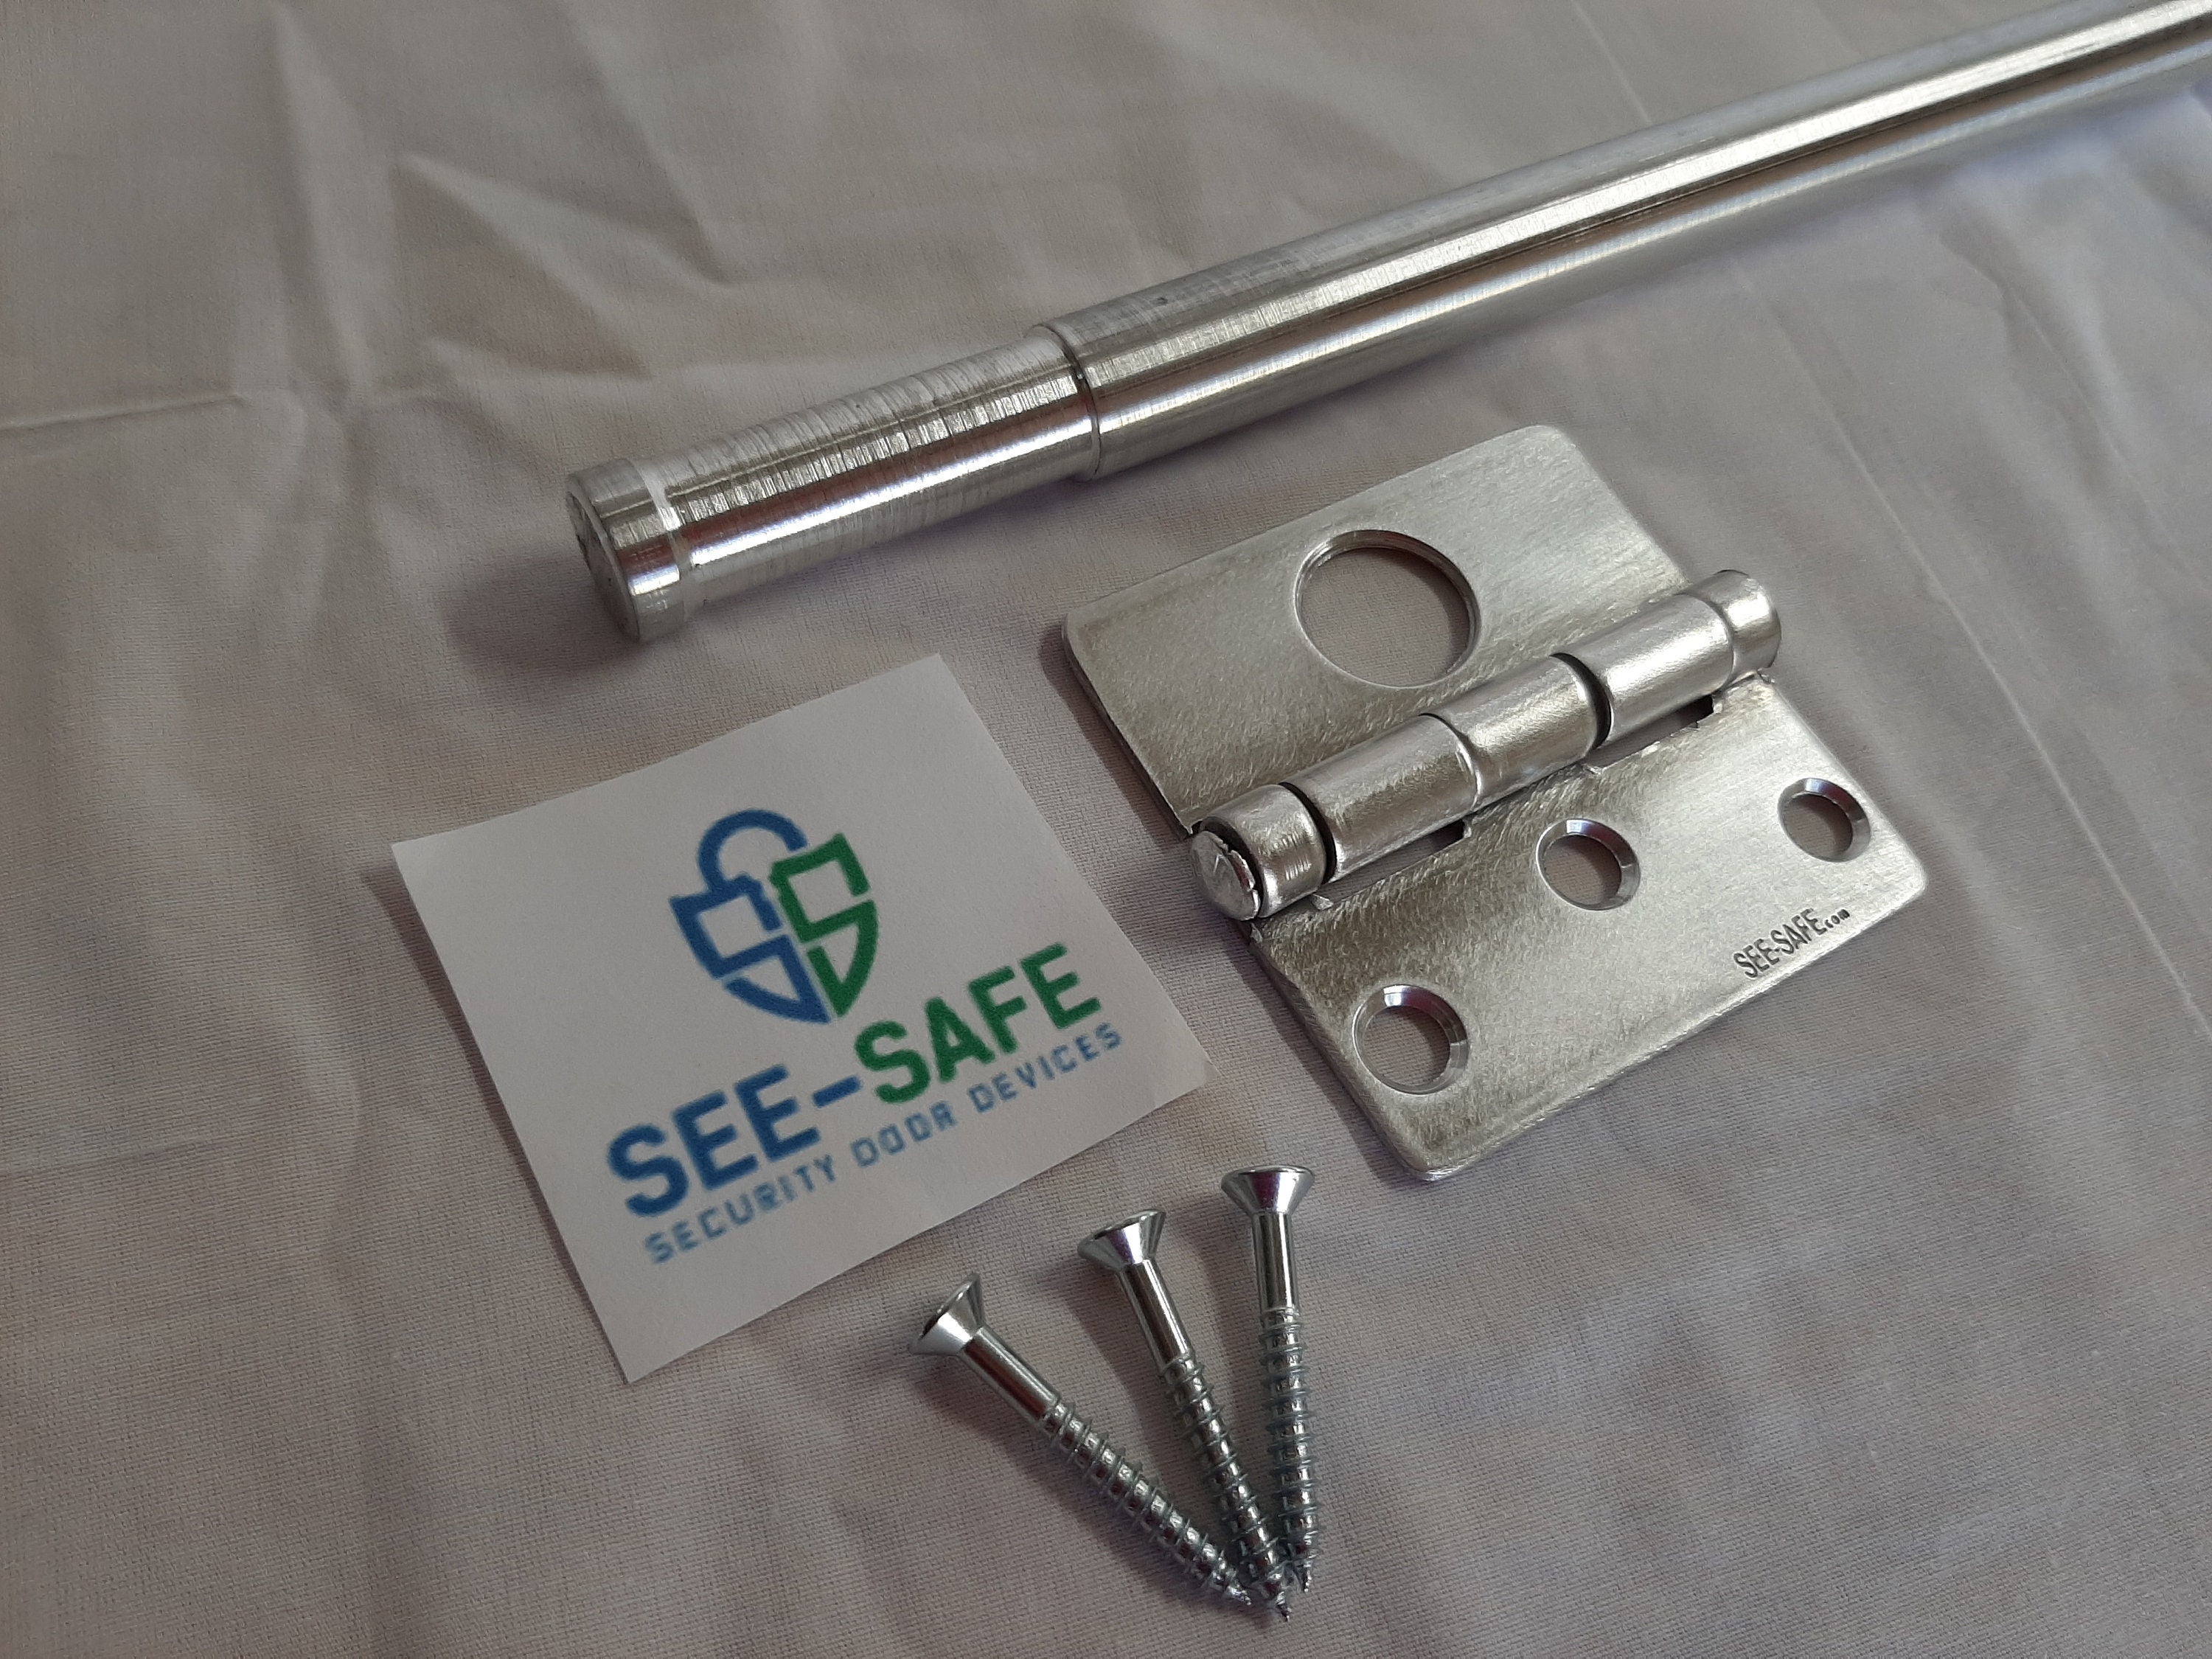 SEE-SAFE HOME SECURITY SOLID SECURE DOOR BAR LOCK BARRICADE JAMMER STOP 44